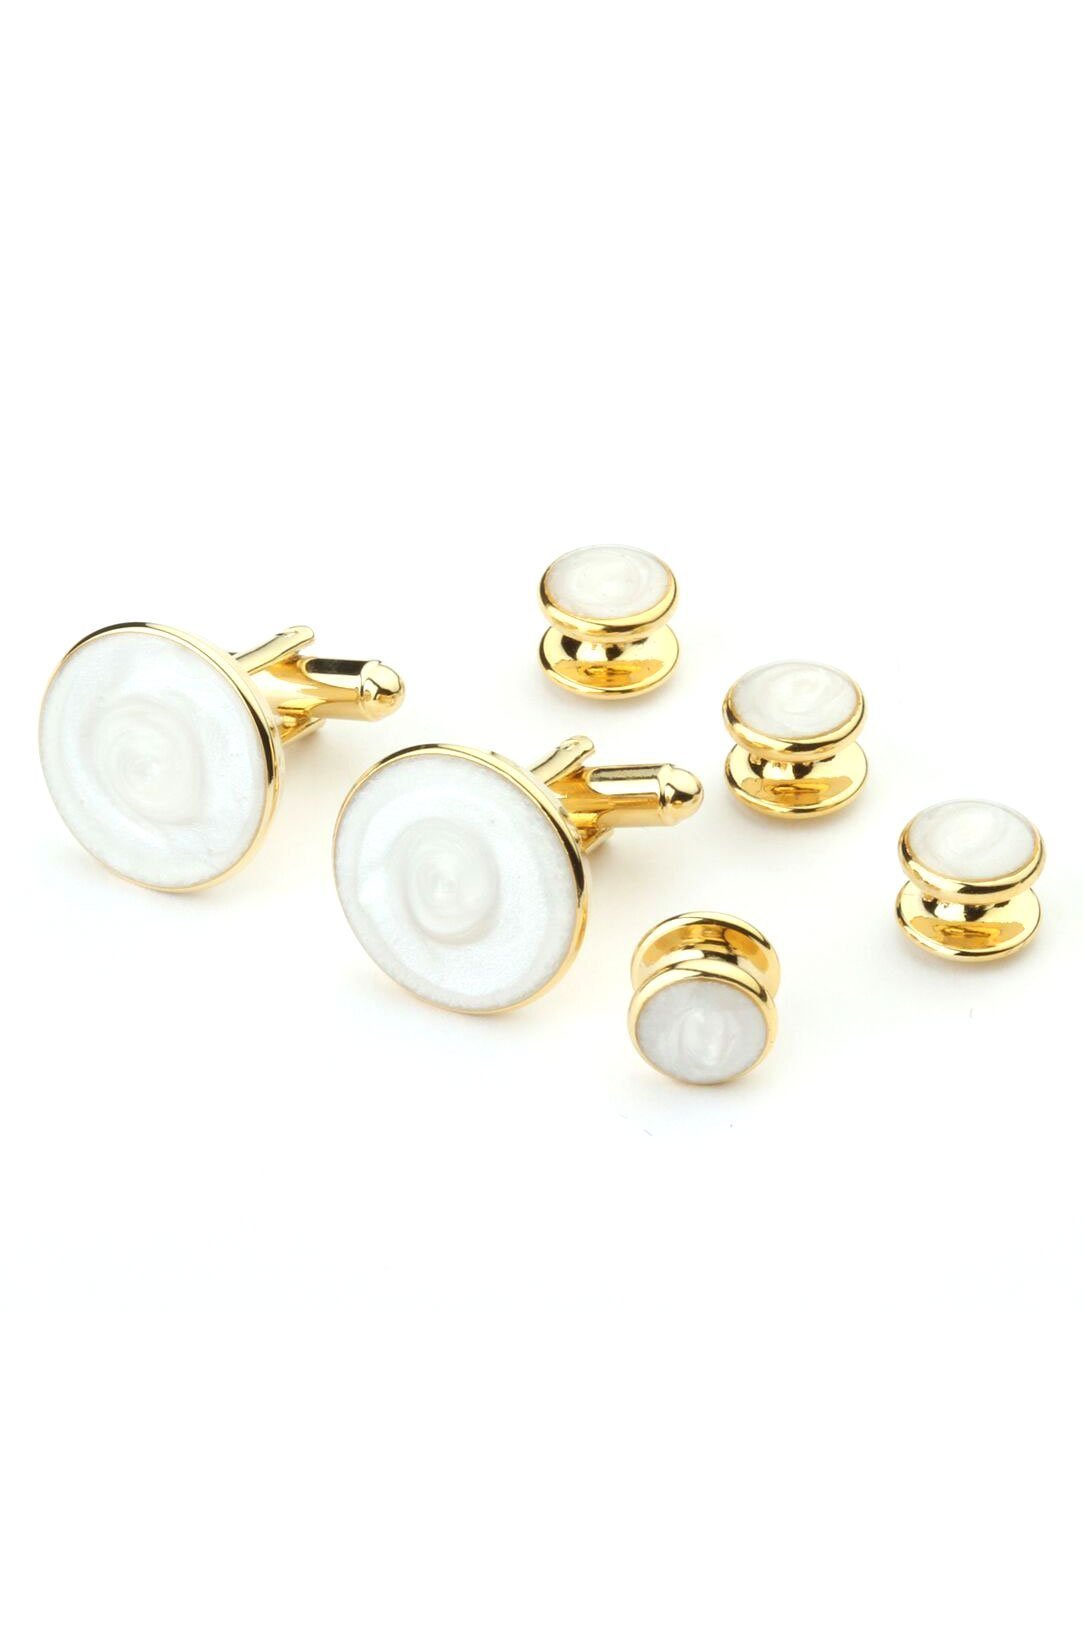 Cristoforo Cardi Mother of Pearl with Gold Trim Studs and Cufflinks Set